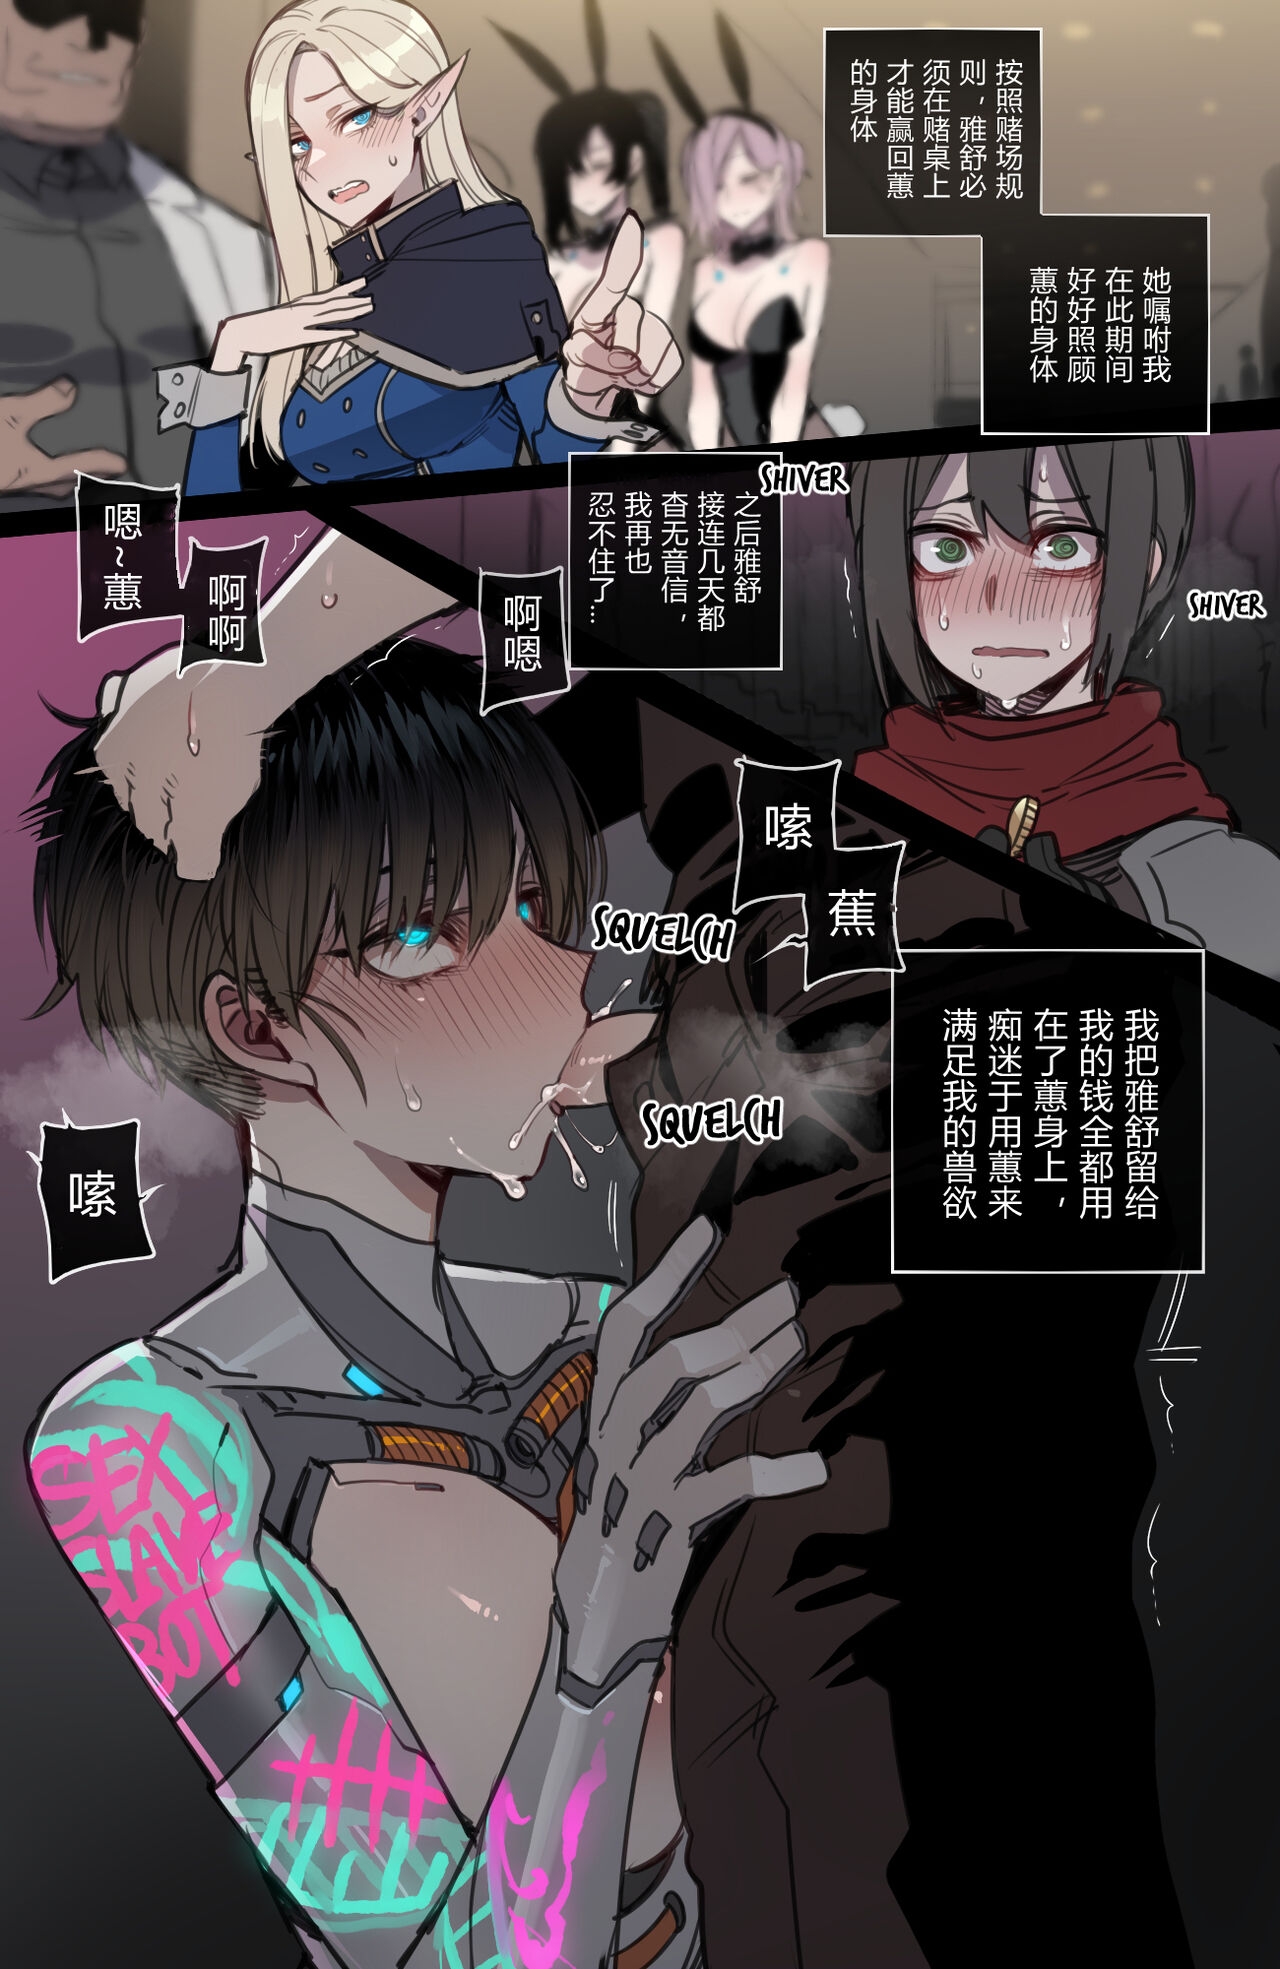 [ratatatat74] Bad Ending Party [chinese](Ongoing) 41